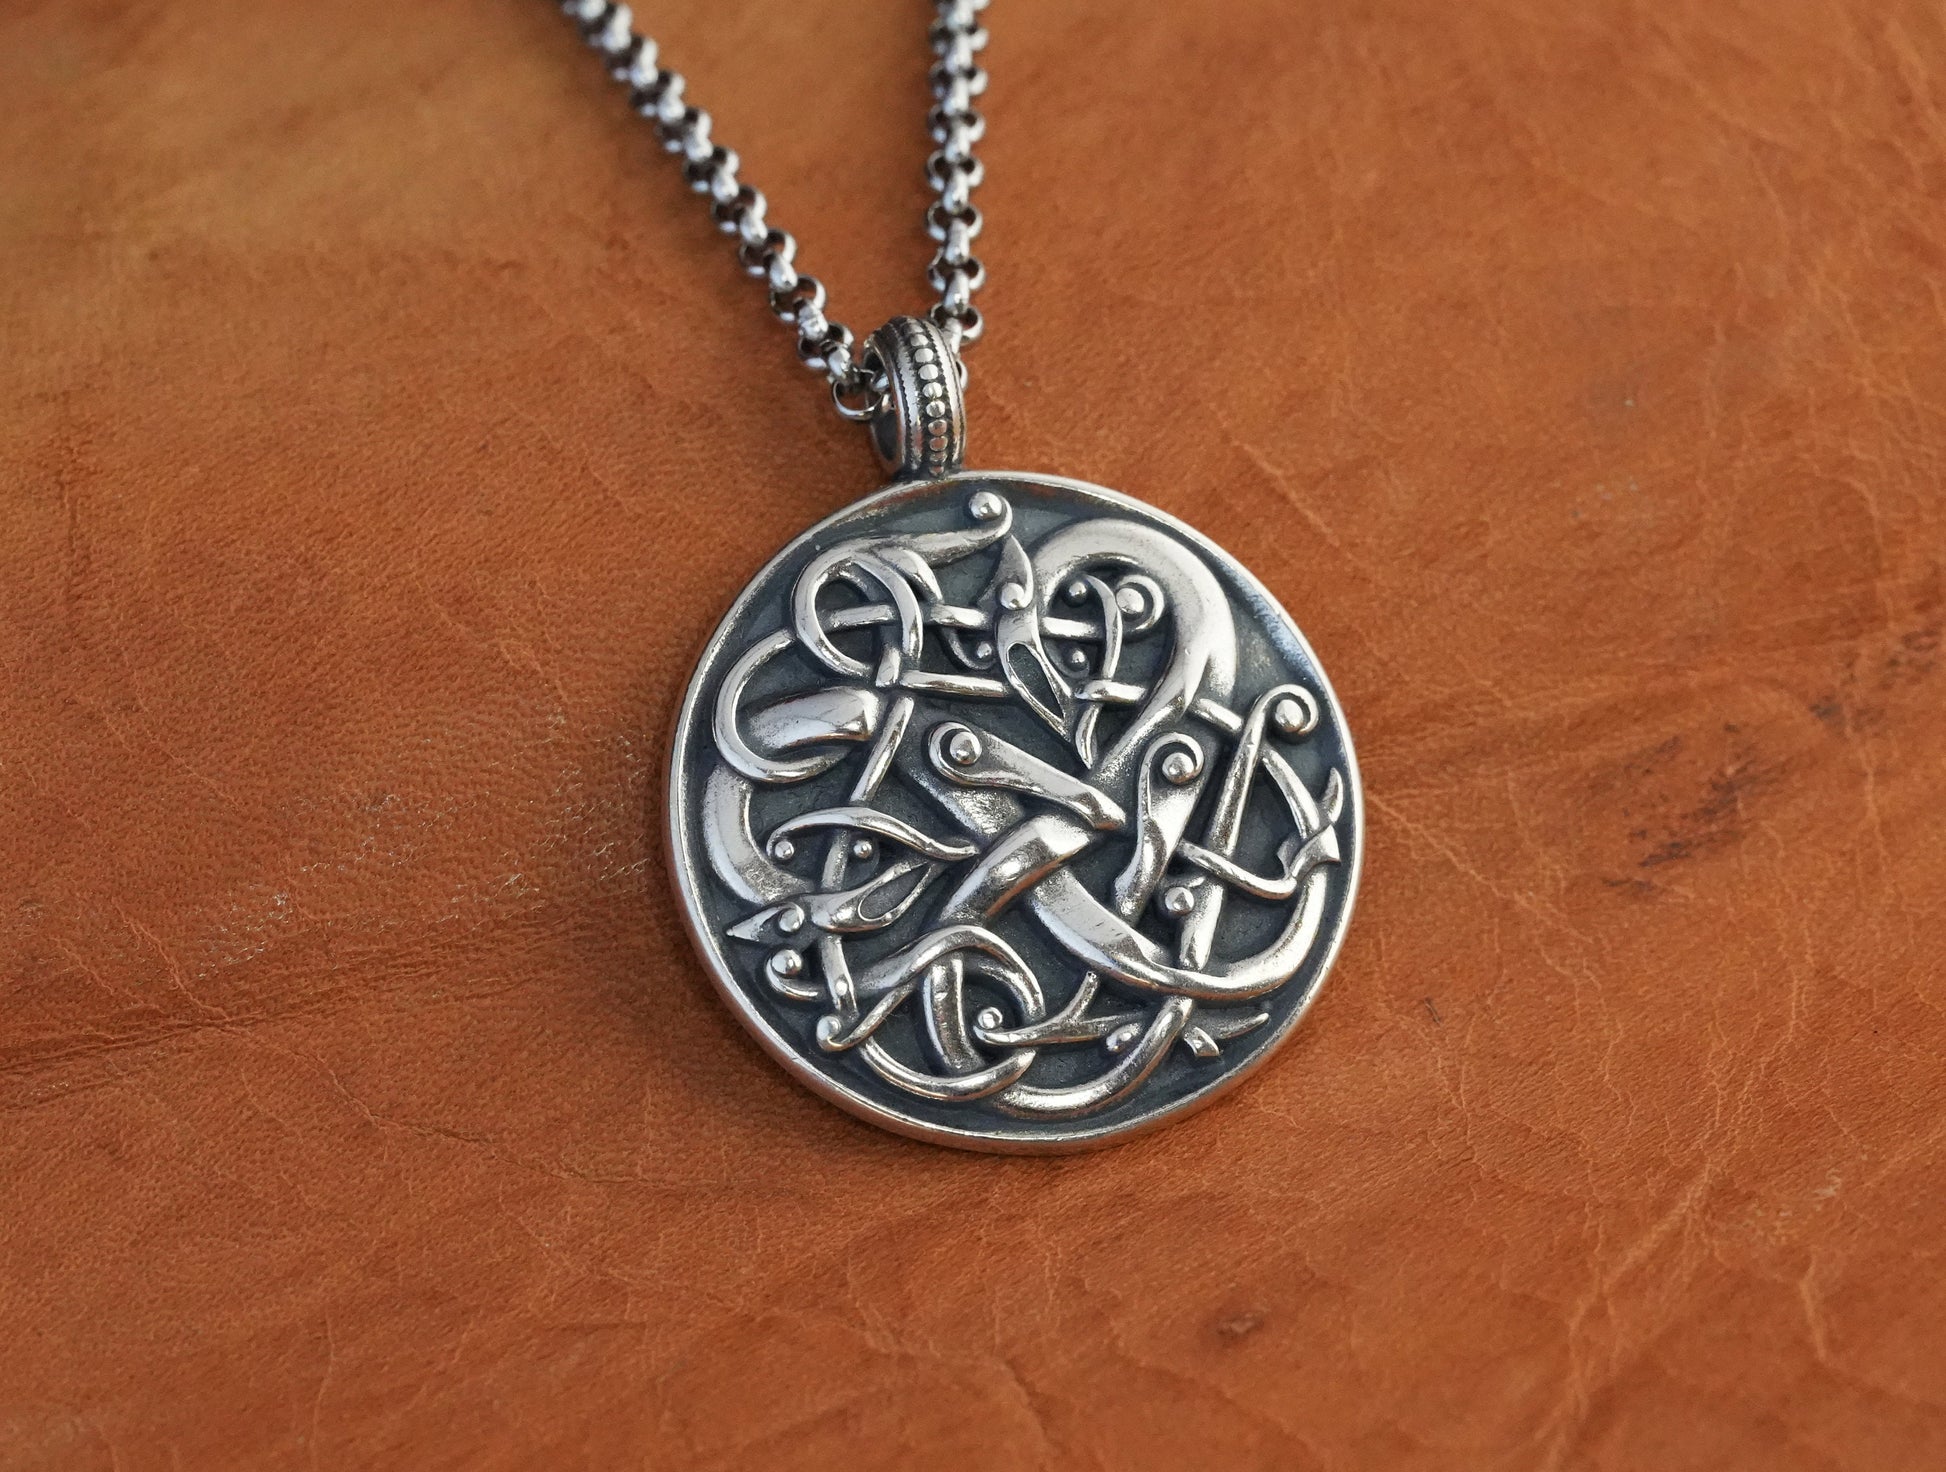 Viking Norse Urnes Dragon Snake Silver Pendant Necklace Amulet Ancient Jewelry for Men Women with Chain - Baldur Jewelry